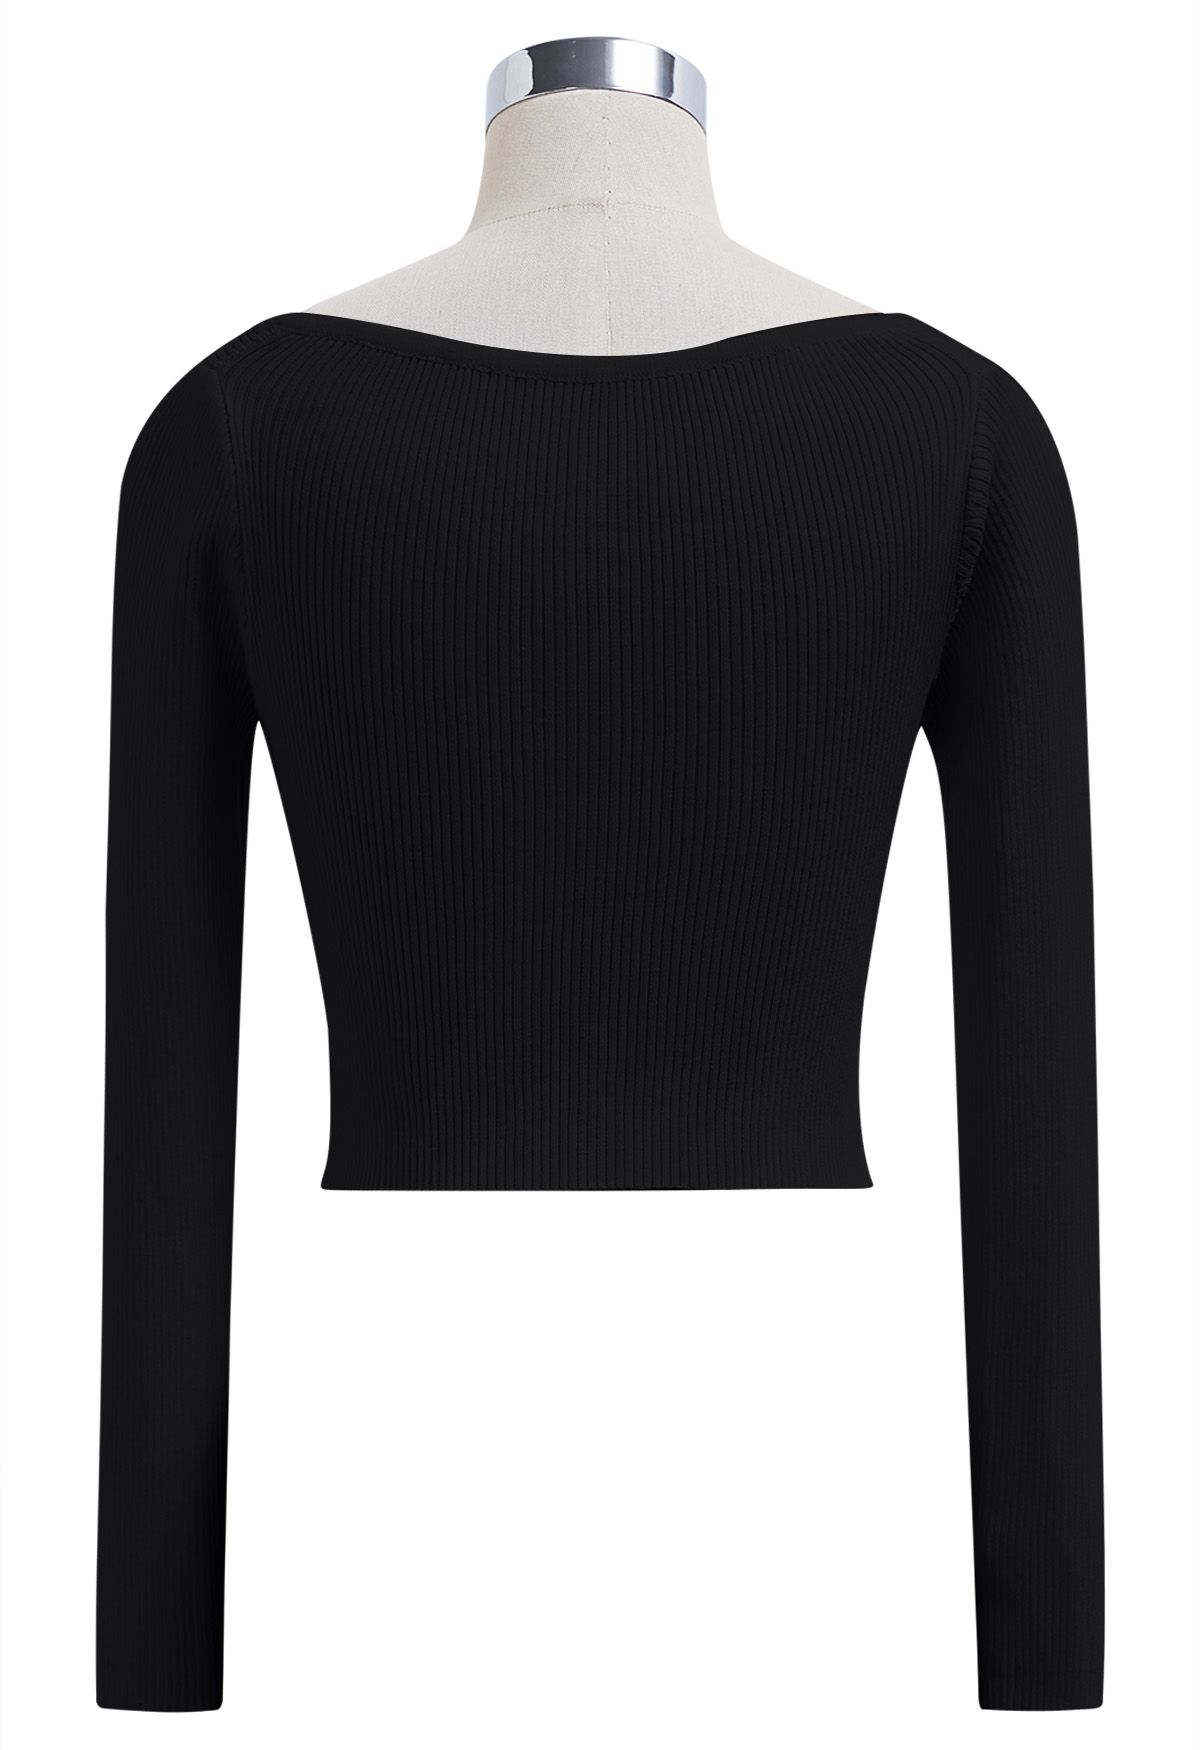 Notched Neckline Ribbed Knit Crop Top in Black